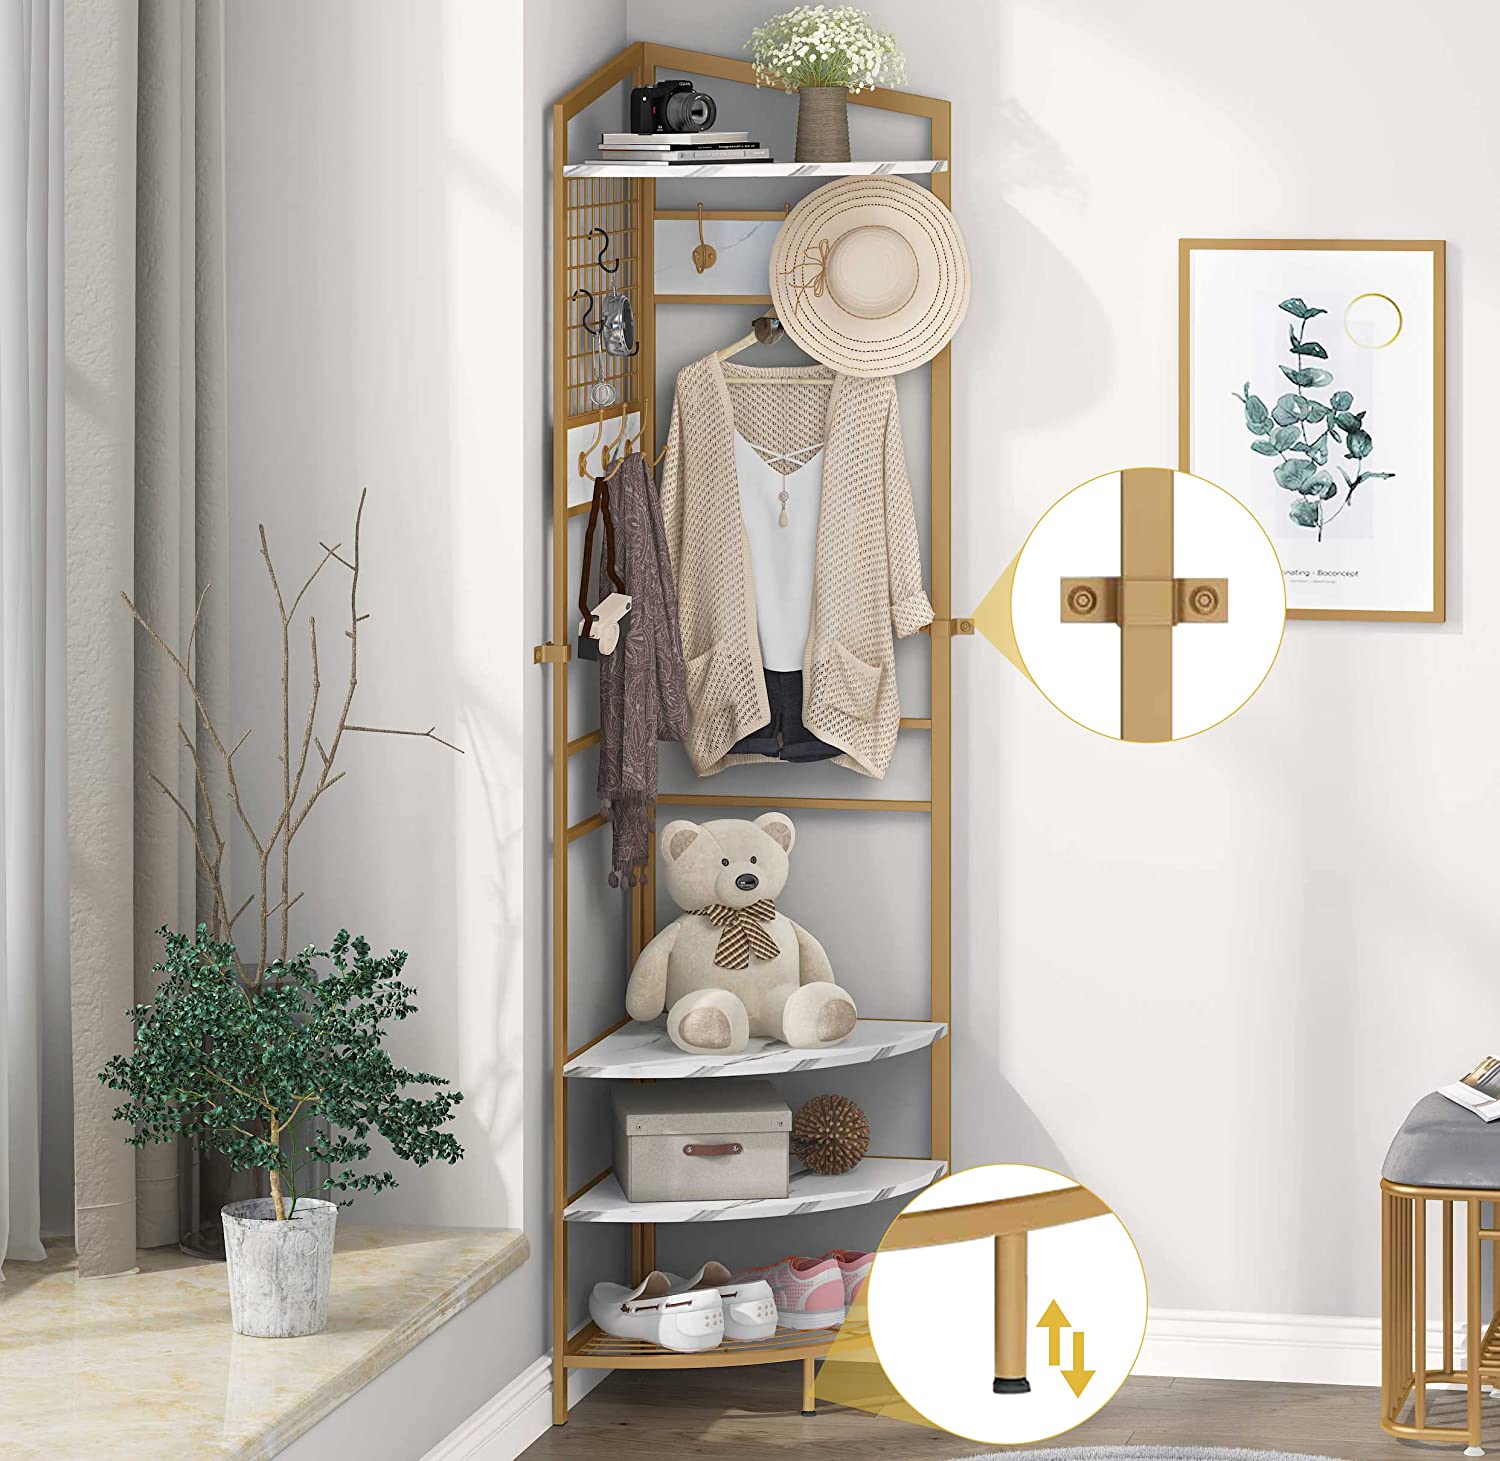  COVAODQ Wooden Rotatable Coat Rack Freestanding Coat Rack Stand  Enterway Hall Tree Free Standing for Coats, Jackets, Bags,Hats : Home &  Kitchen